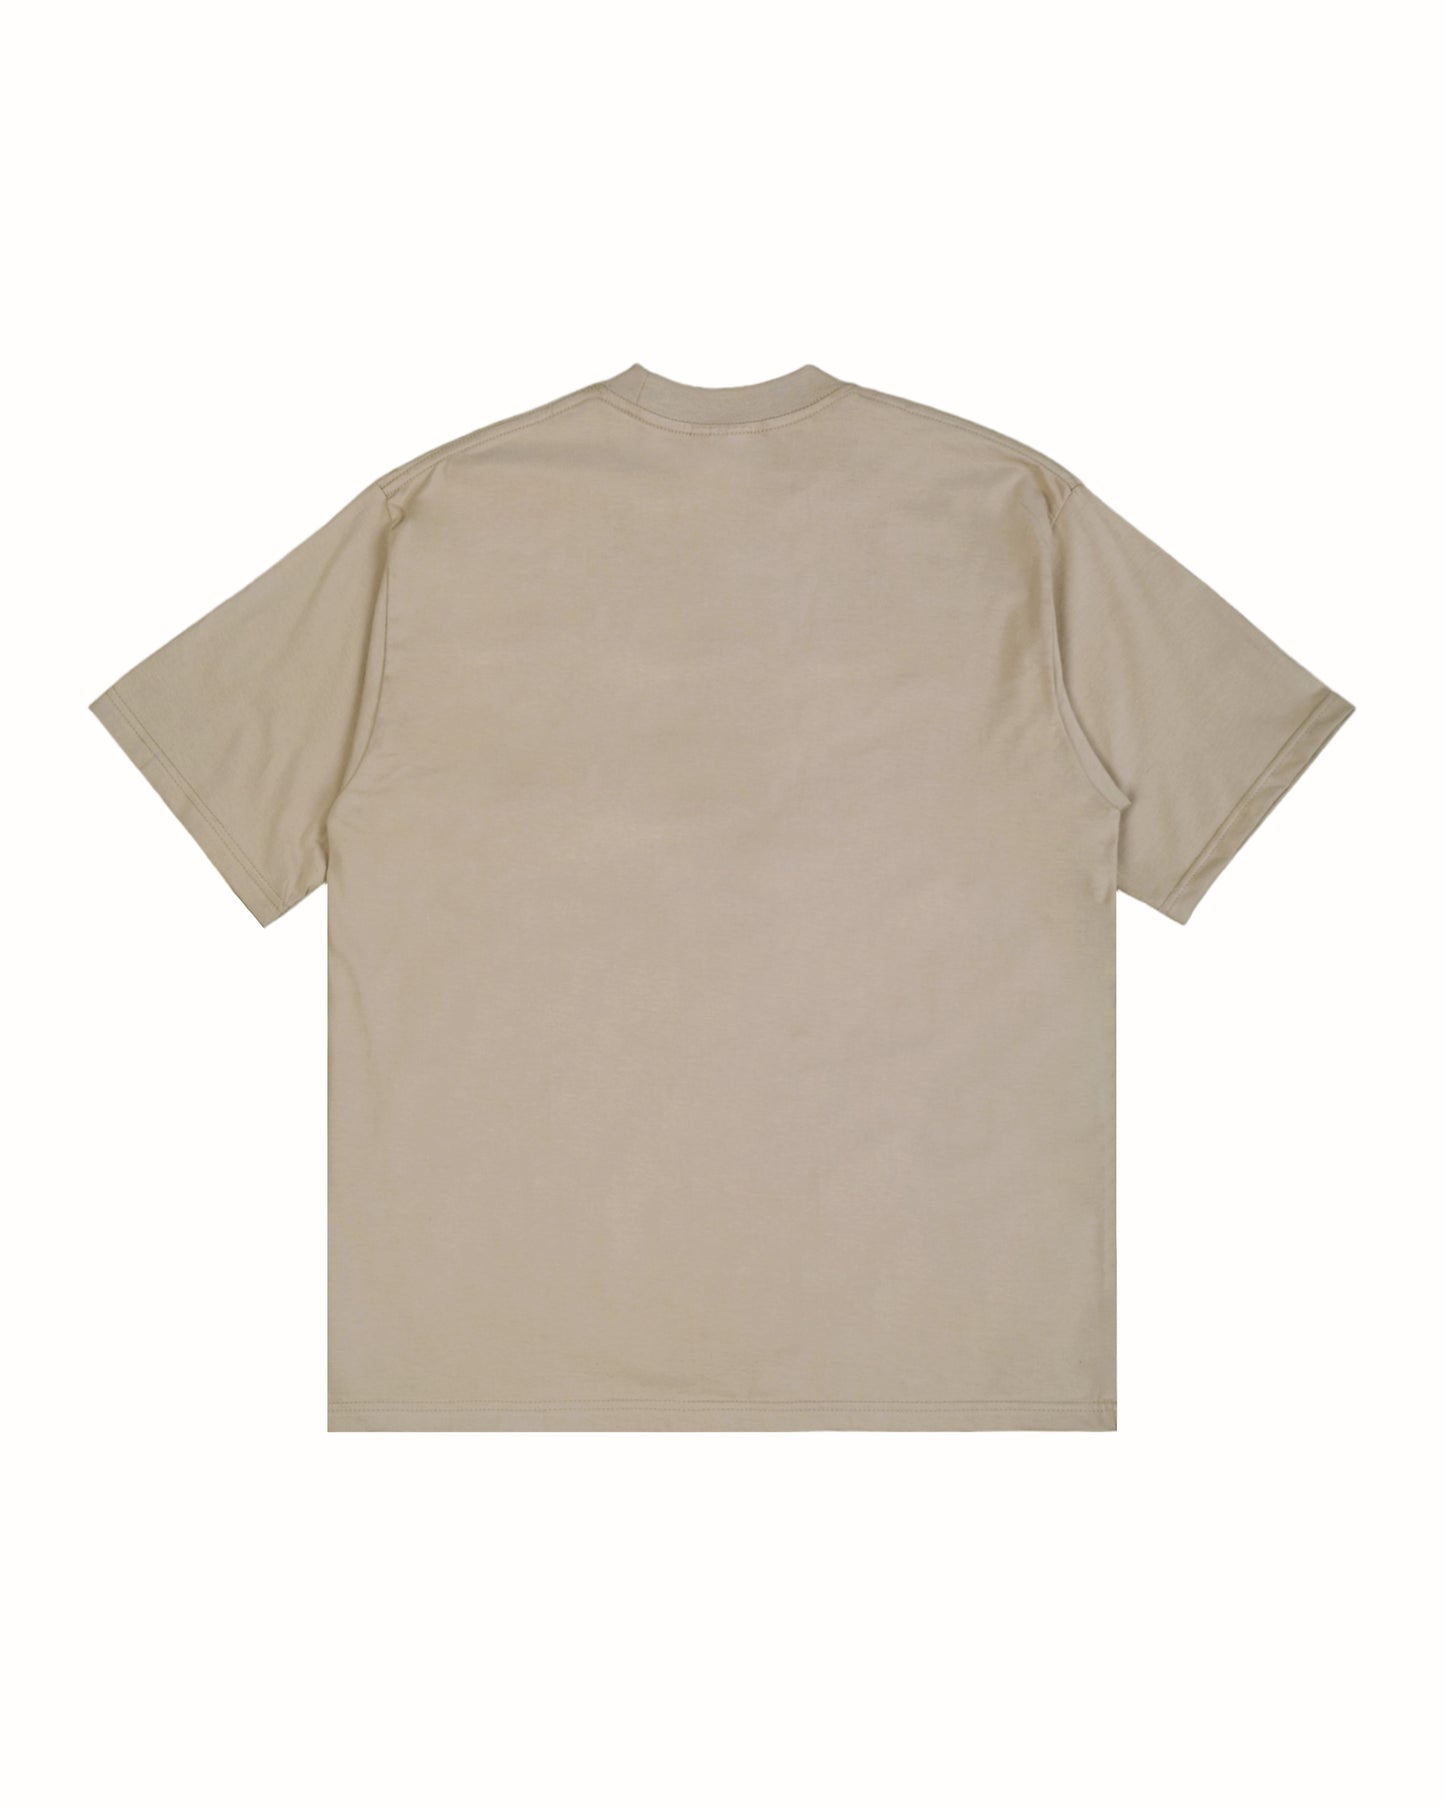 Notari Latte Relaxed Fit Tees